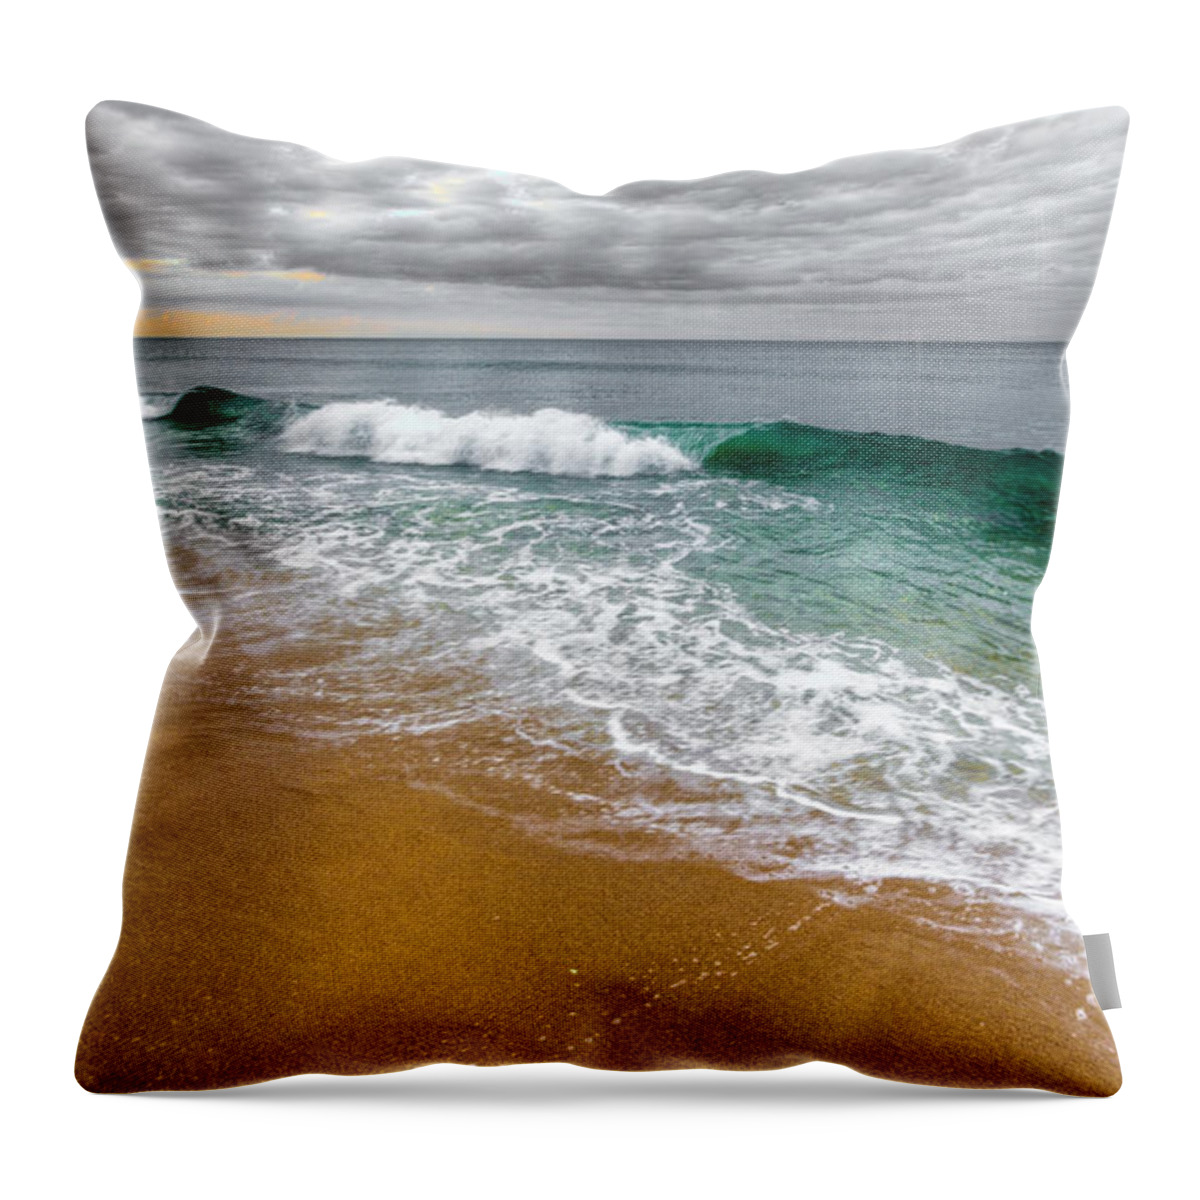 Desaturation Throw Pillow featuring the photograph Desaturation by Chad Dutson